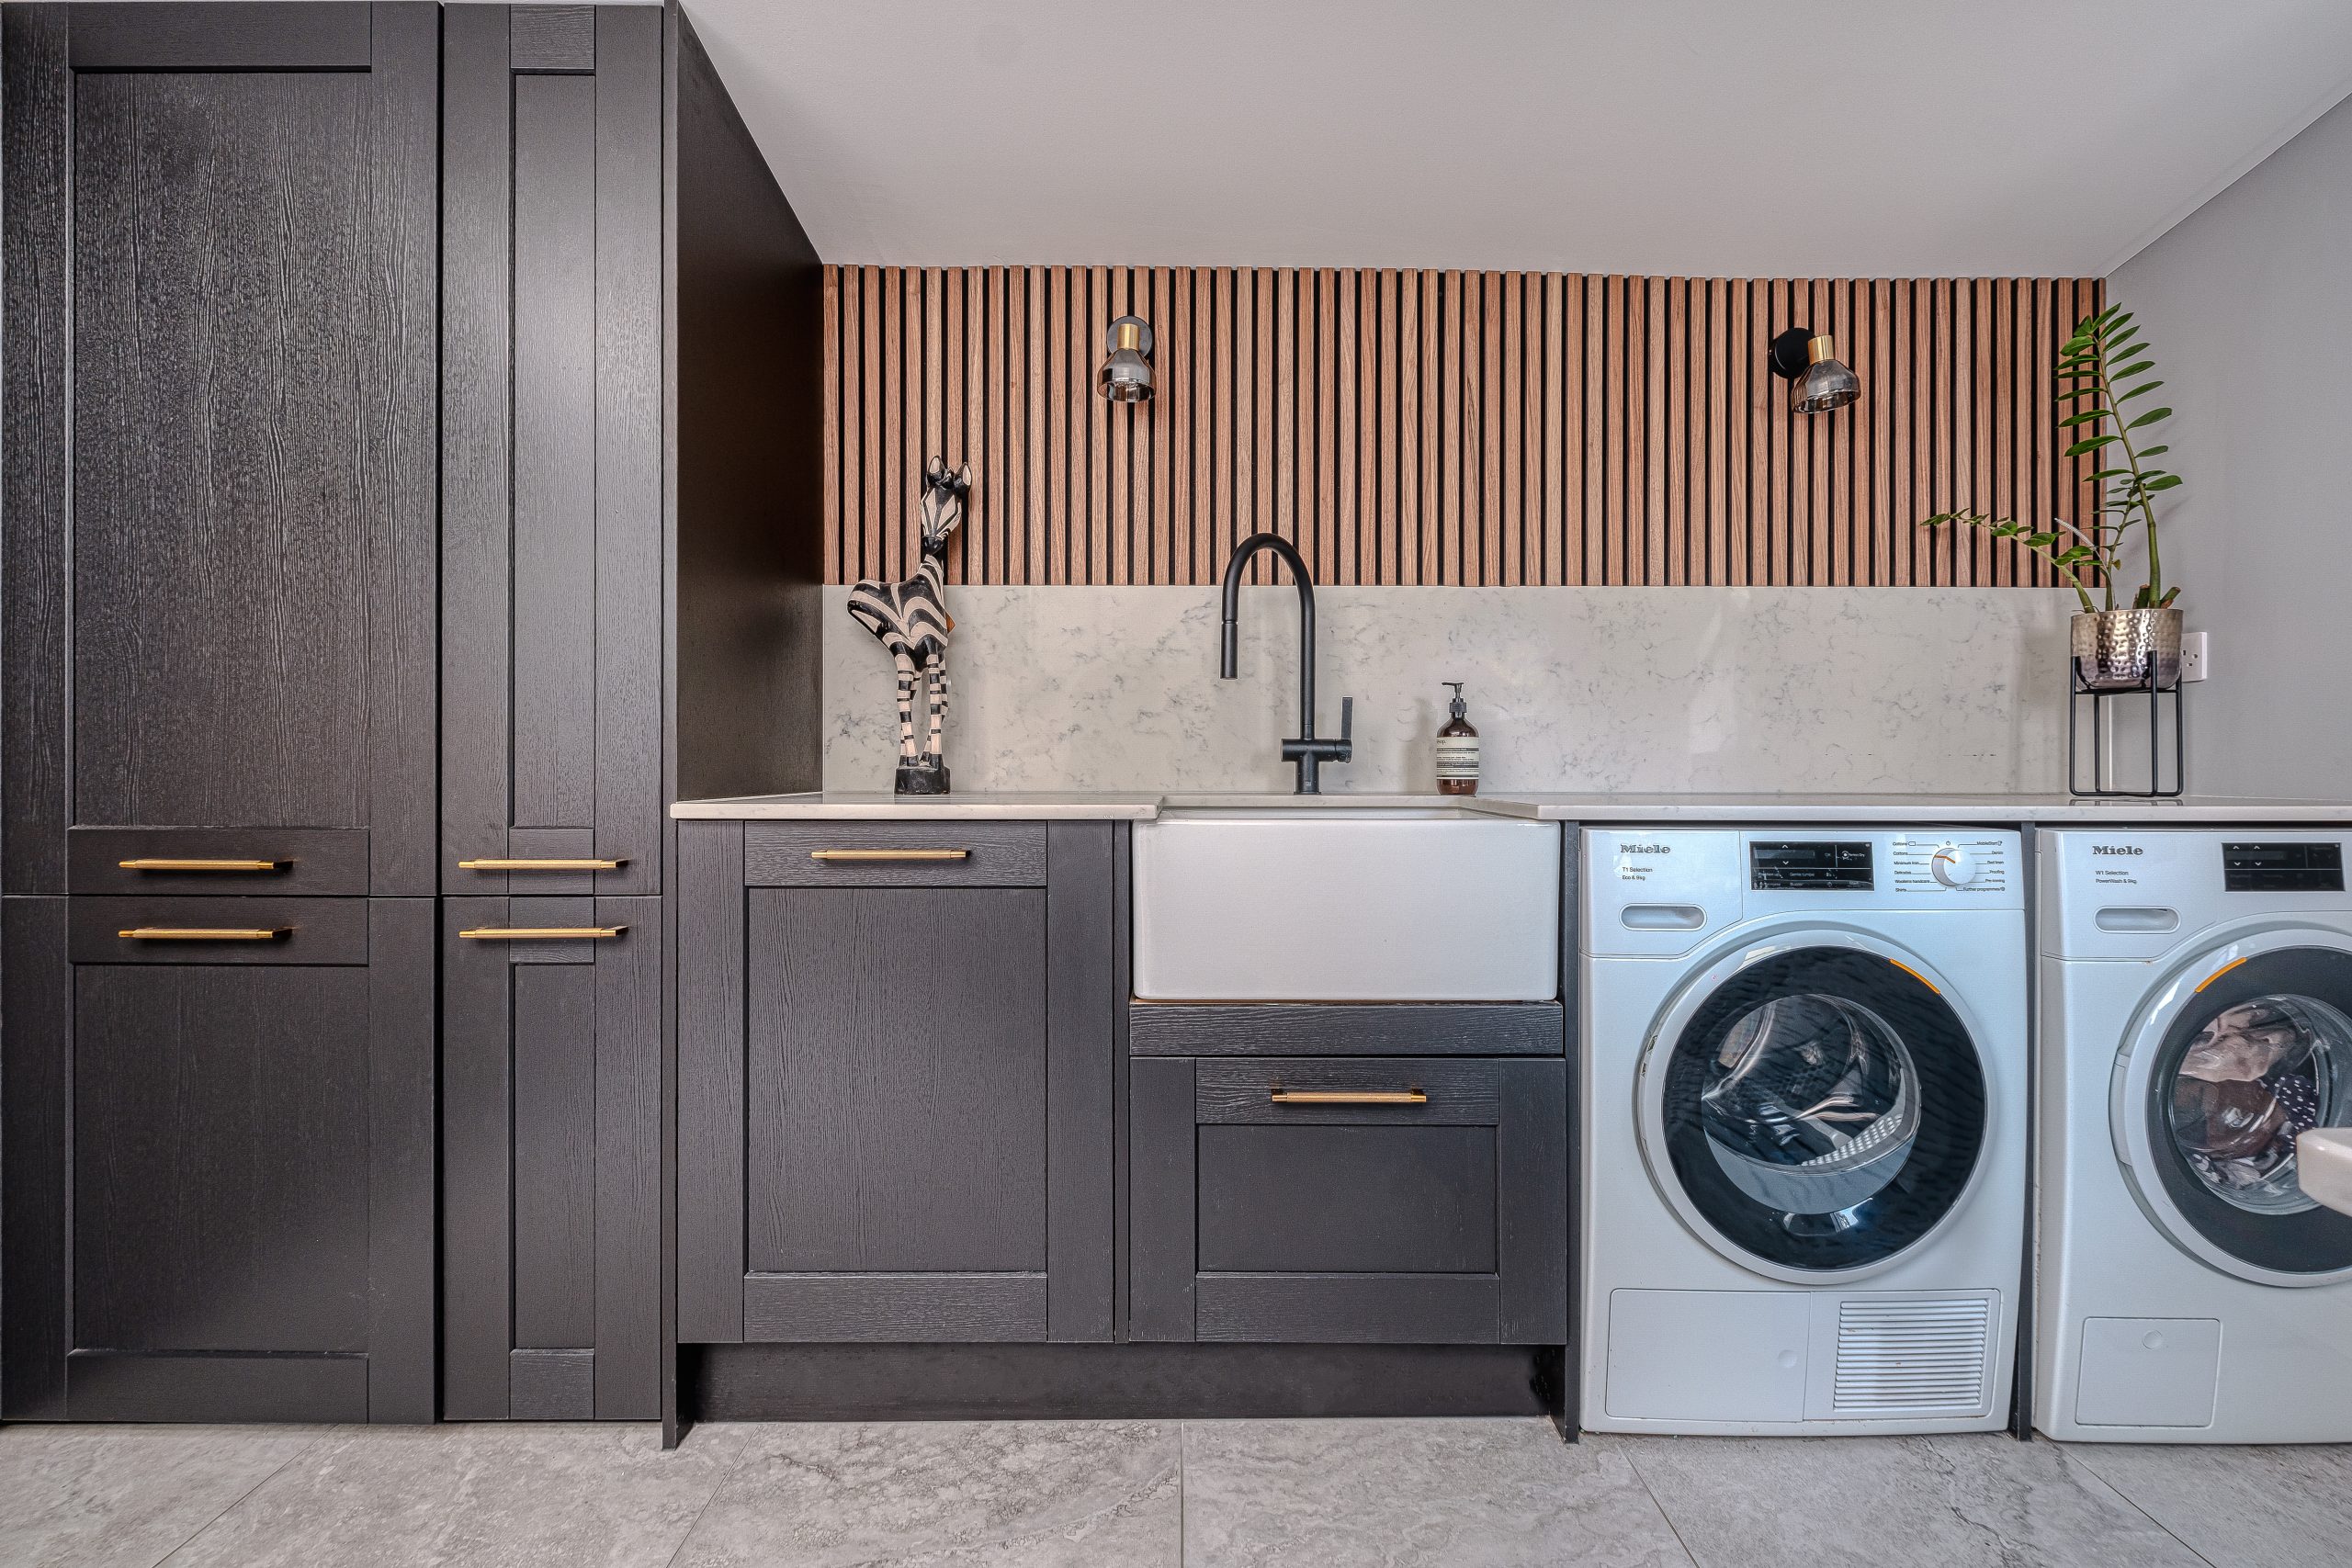 Cool utility room/ laundry room with wood panelling